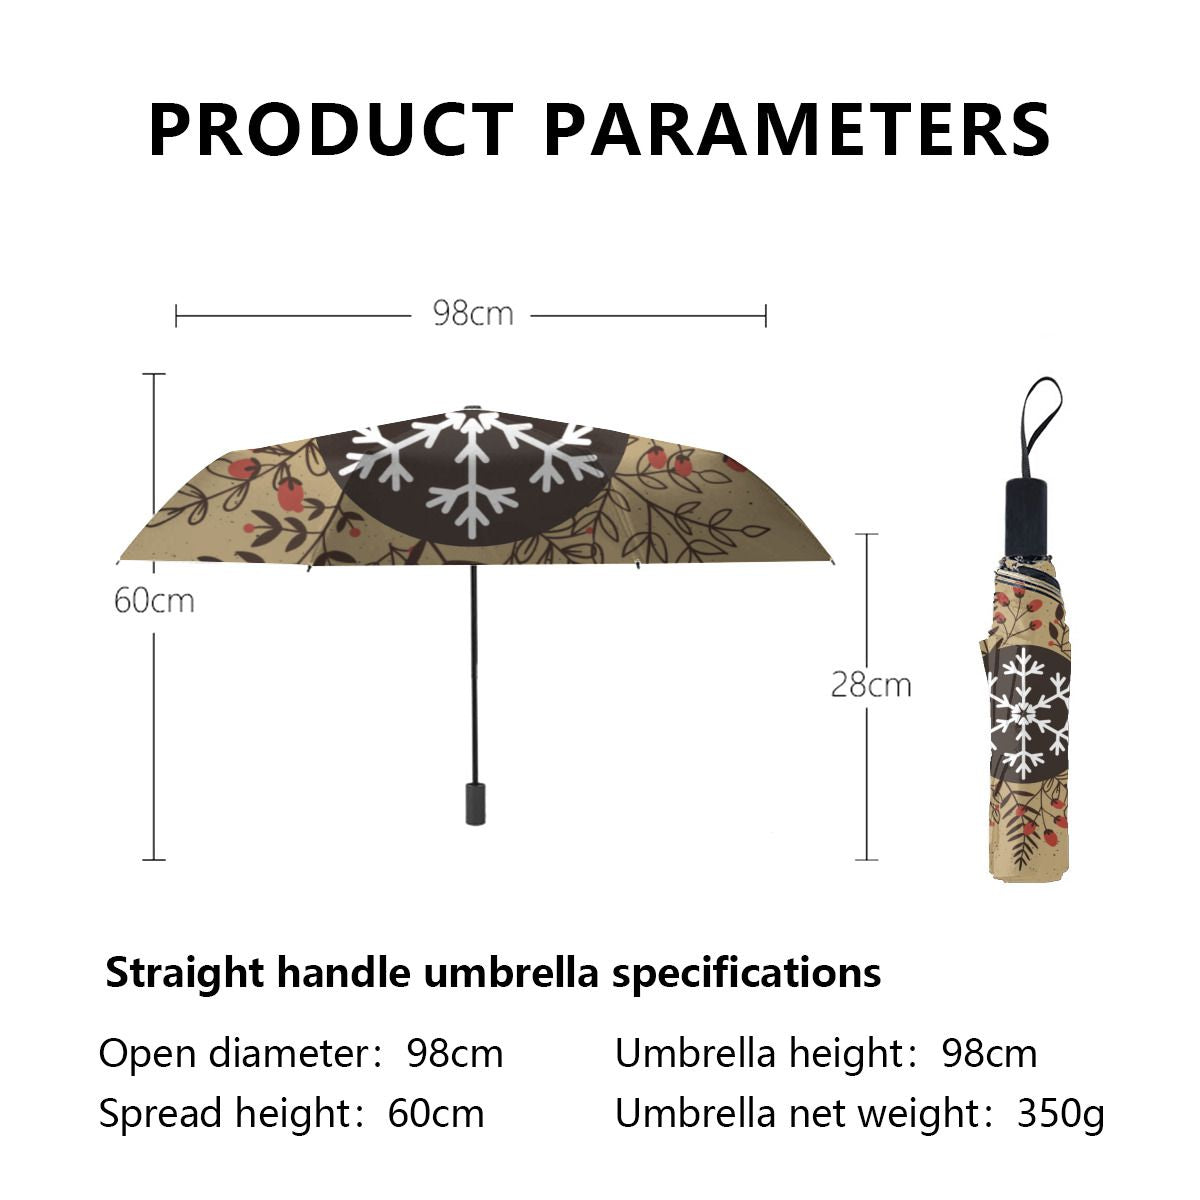 Rustic Christmas Floral Snowflake Holiday Brushed Polyester Umbrella No.FCTH4J